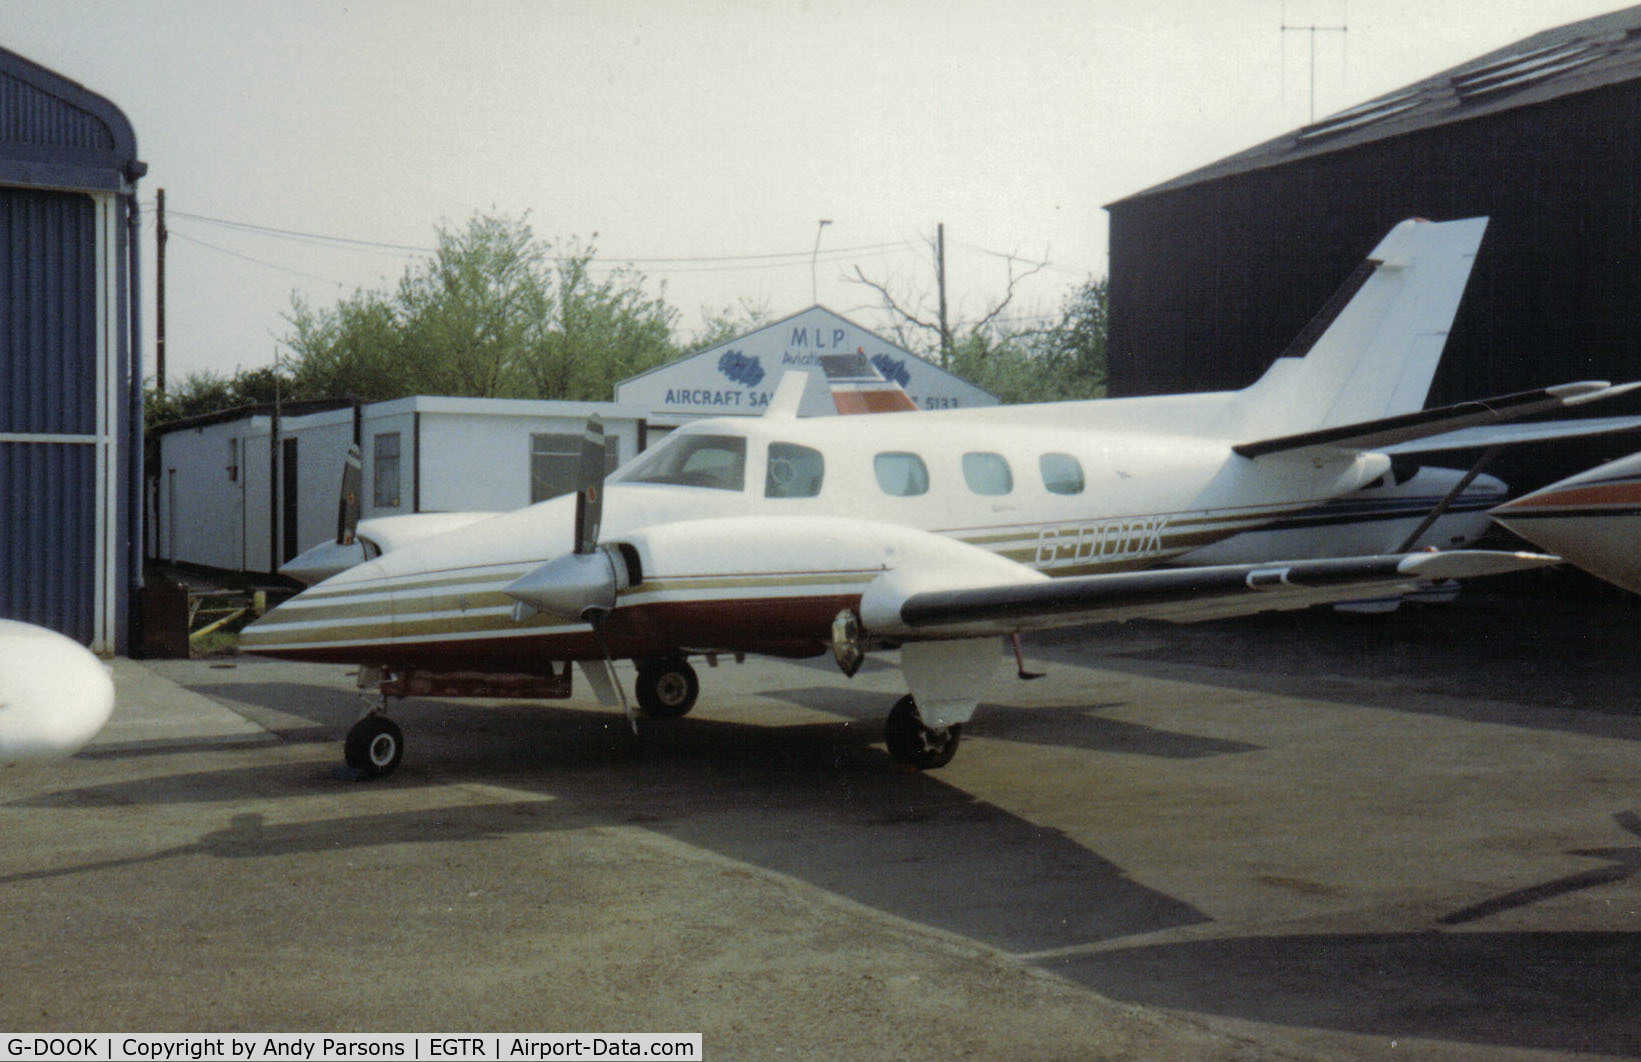 G-DOOK, 1969 Beech 60 Duke C/N P-94, Stiill the best looking GA aircraft around i think but not common un the UK register